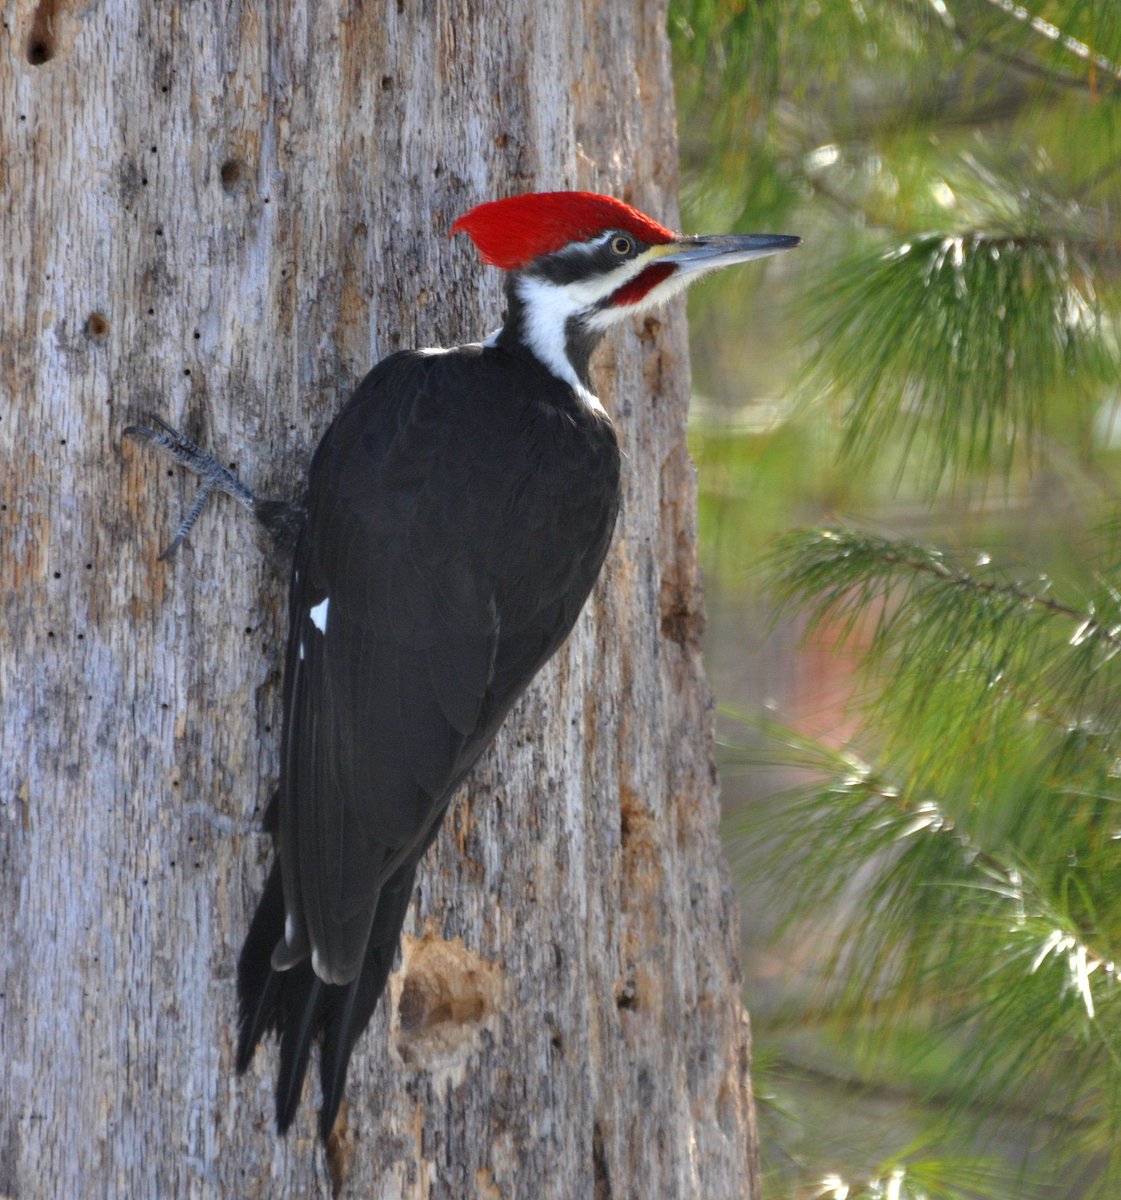 Cleveland Metroparks On Twitter Northeast Ohio Is Home To 7 Species Of Woodpeckers Including This One The Pileated Woodpecker The Largest Species Of Woodpecker In North America Nearly The Size Of Crow,Short Tailed Opossum Setup